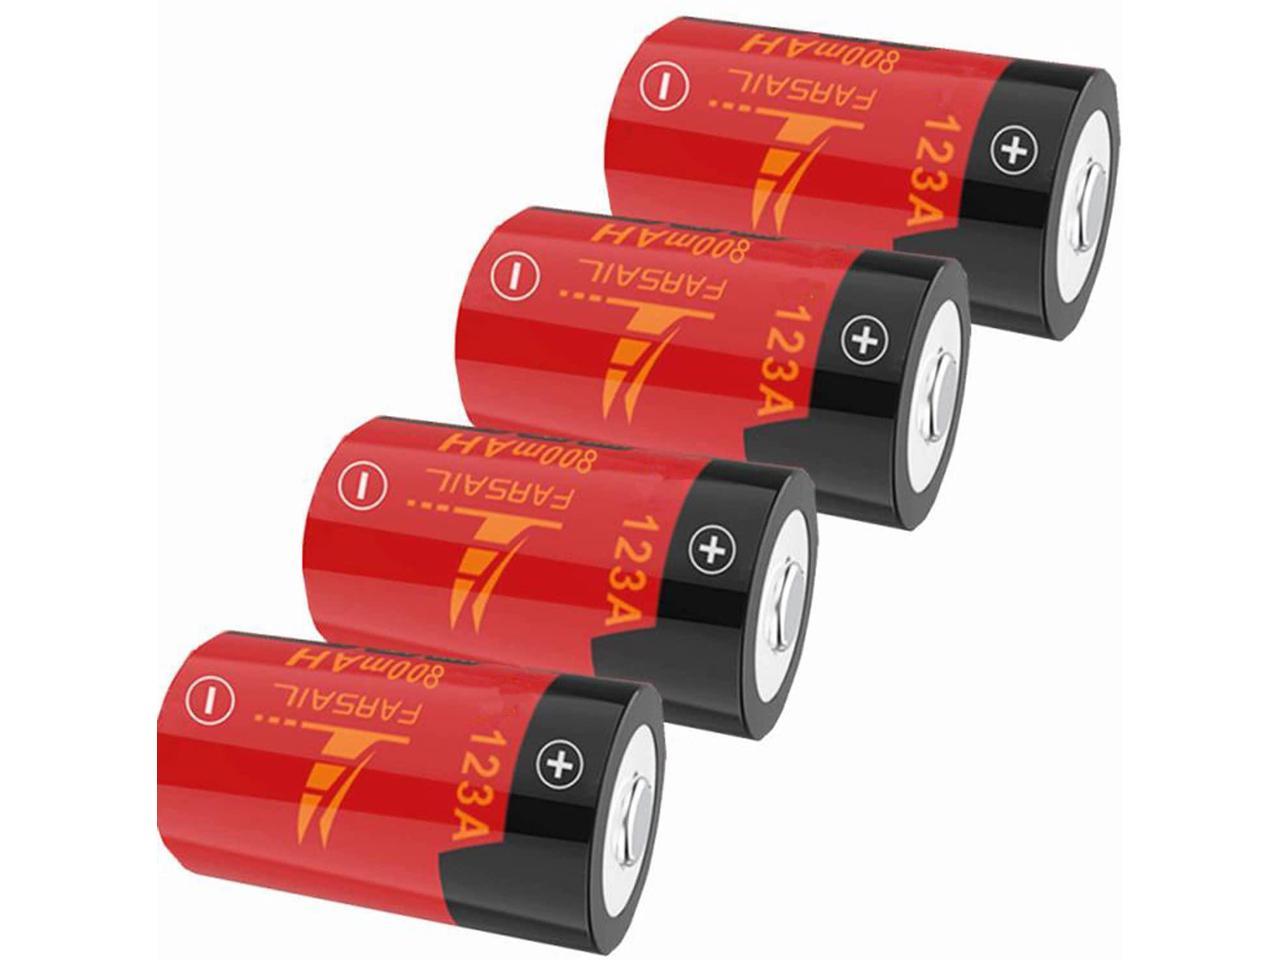 CR123A Lithium Batteries for Arlo FARSAIL 8-Pack CR123A Battery Rechargeable Compatible with Arlo VMC3030 VMK3200 VMS3130 3230C 3430 3530 Cameras Security System 